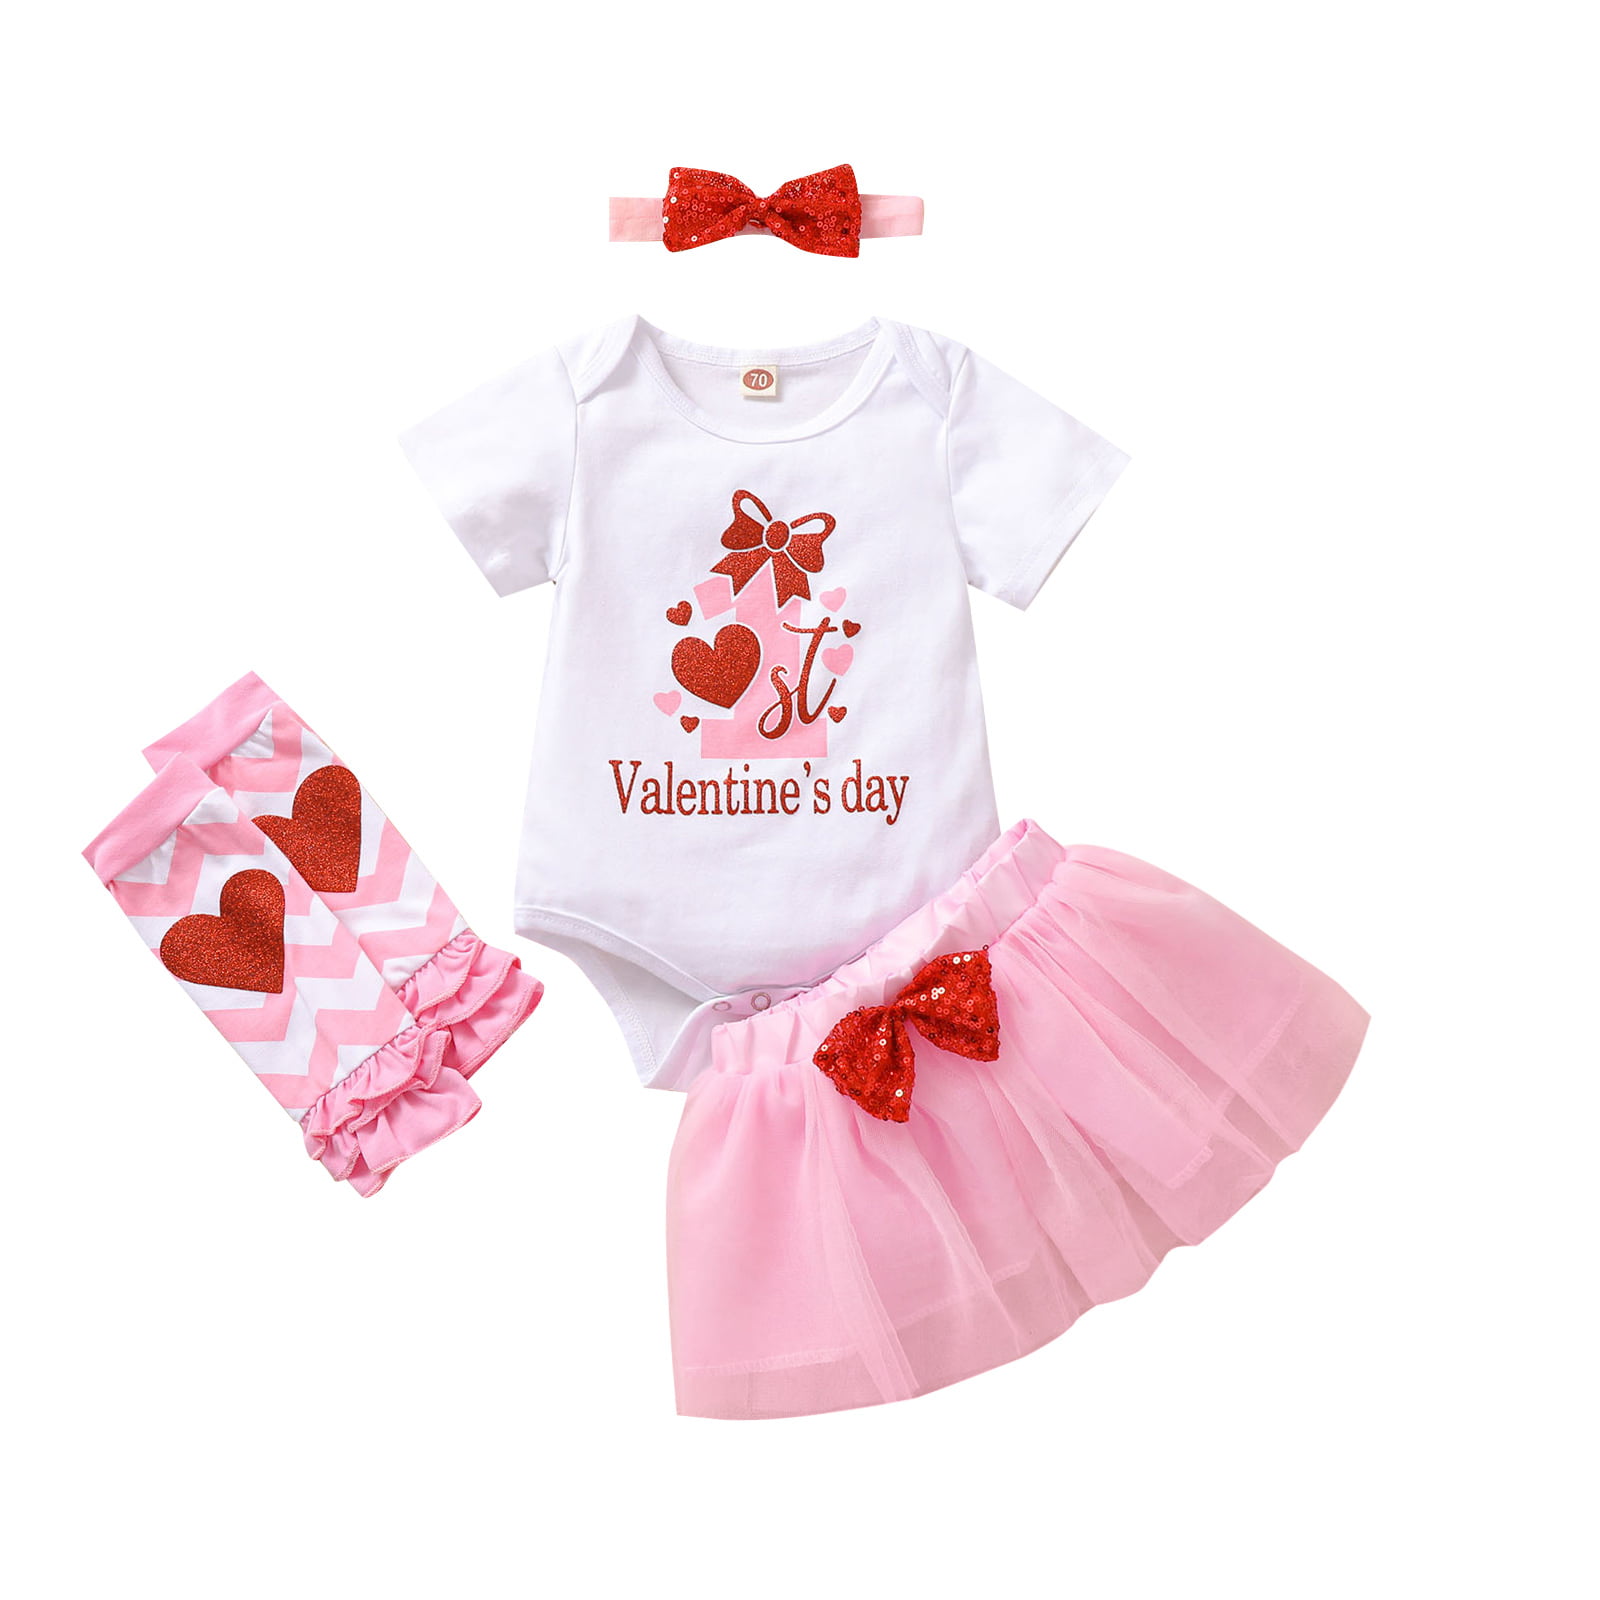 Baby Girls My 1st Valentine's Day Princess Outfits Romper Skirt Headband Clothes 